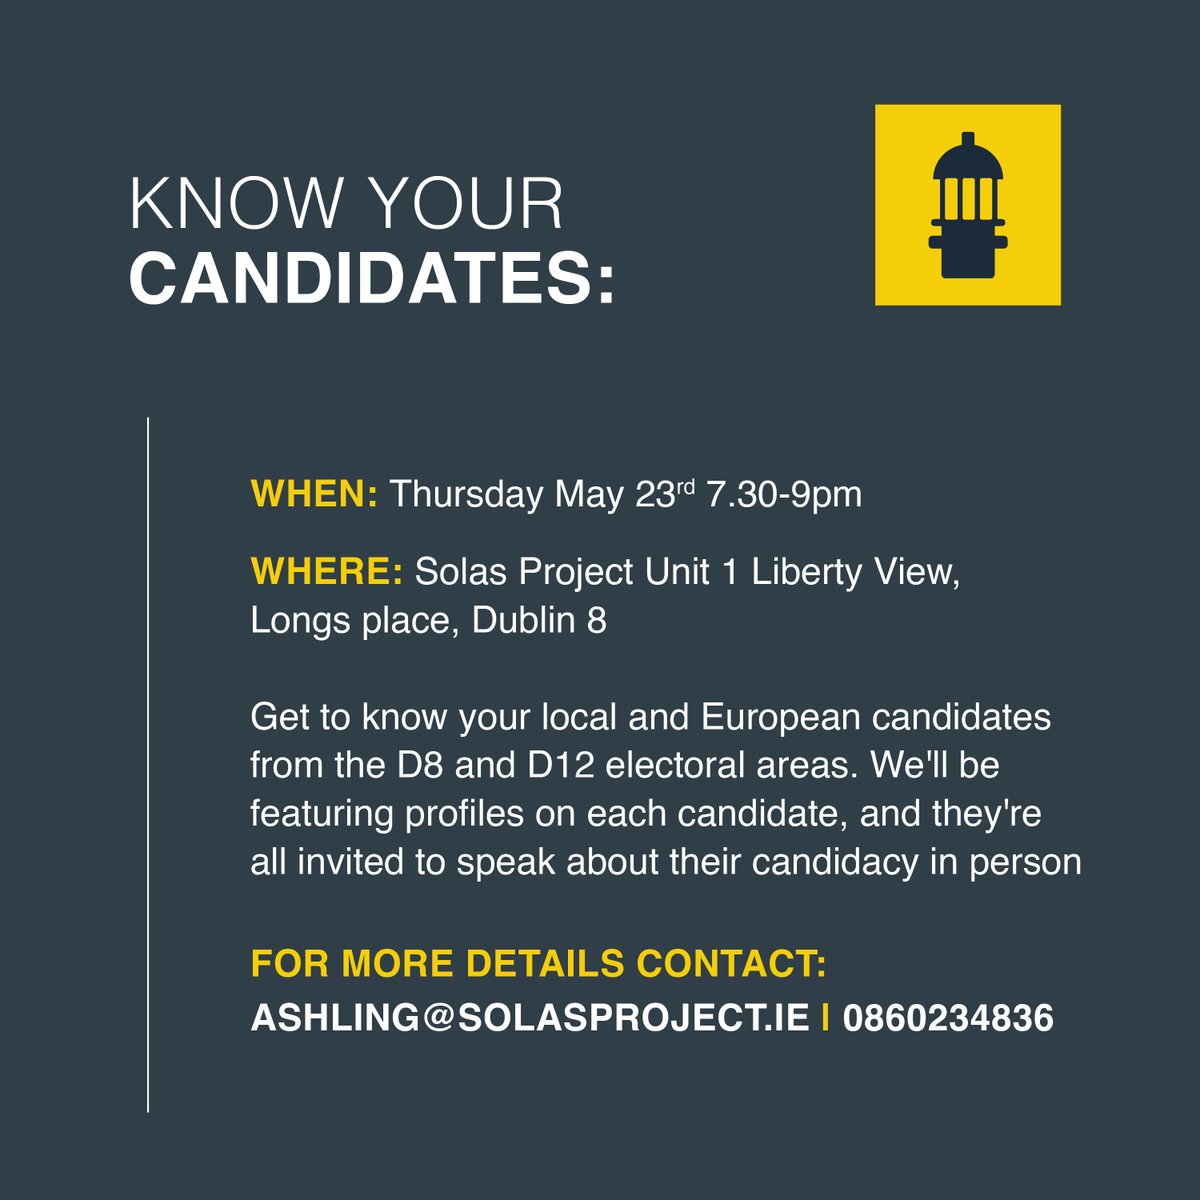 It was fantastic to have 22 attendees at our voter registration night a few weeks ago! As a follow-up, we're hosting a 'Know Your Candidates' evening on Thursday, May 23rd, from 7.30 to 9 PM. We hope to see you there!
#Vote #KnowYourCandidates #YourVoiceMatters #YourVoteCounts